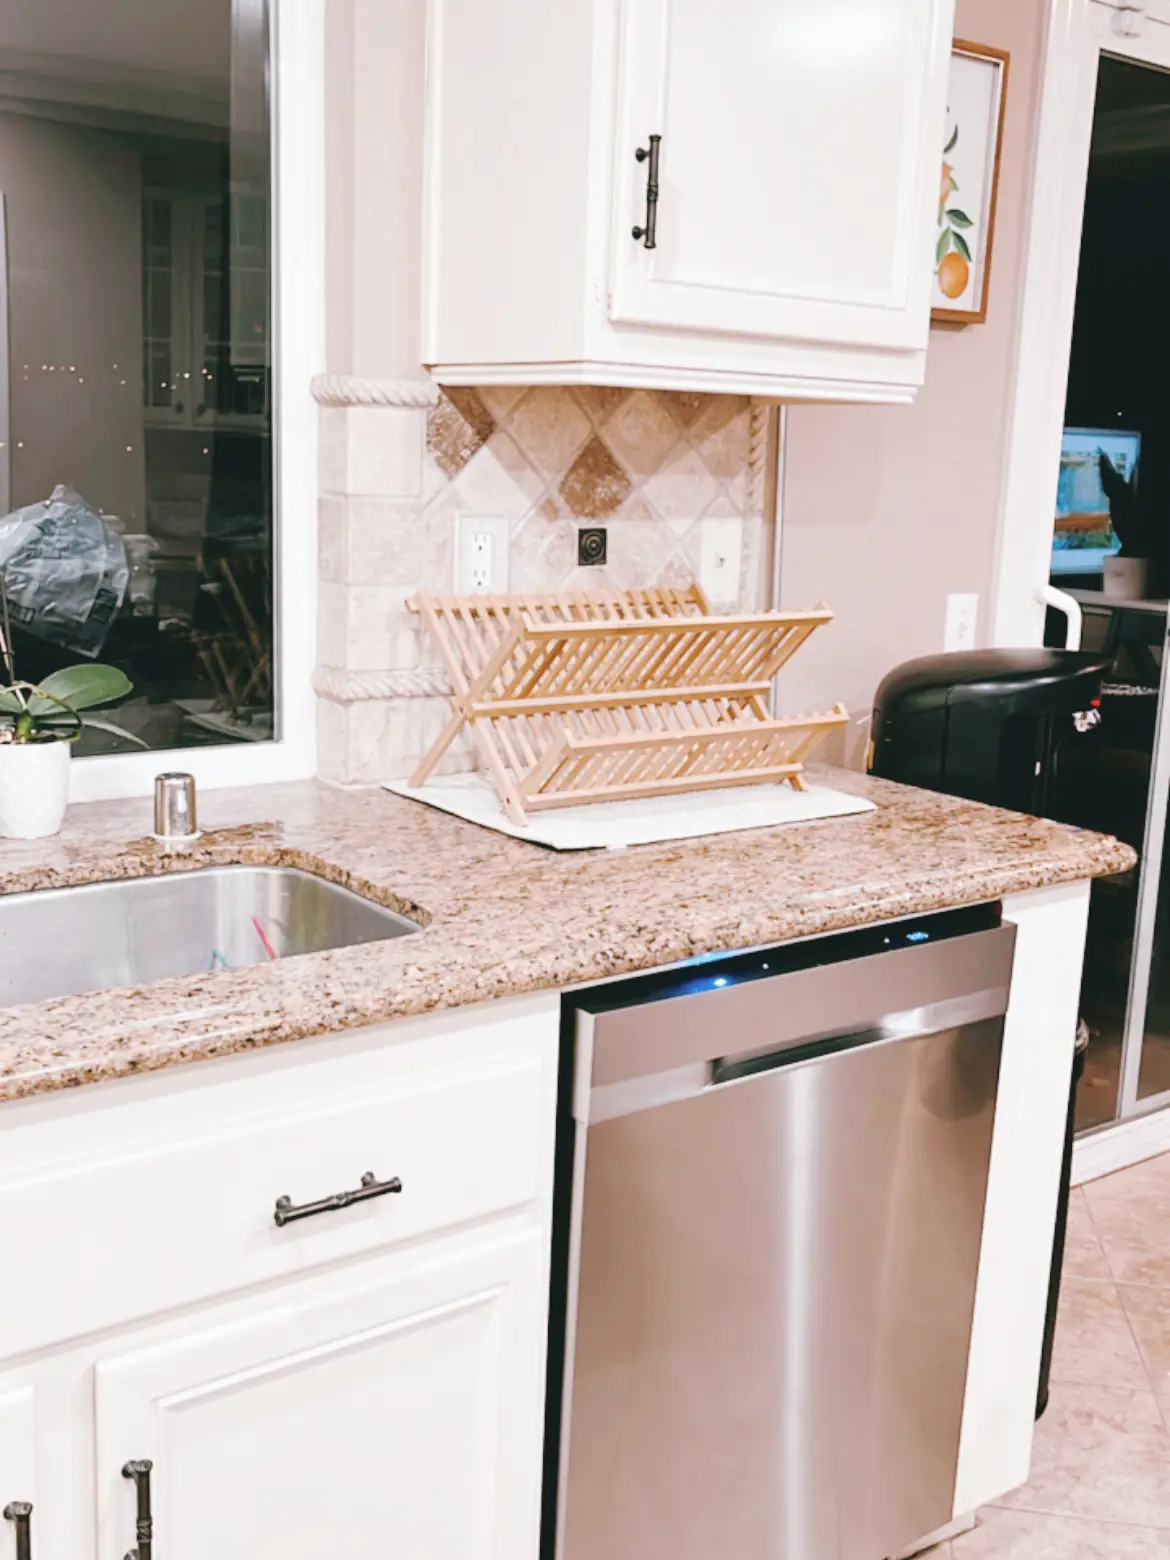 Fotile 3-in-1 In-Sink Dishwasher Review: Kitchen Space-Saving Solution